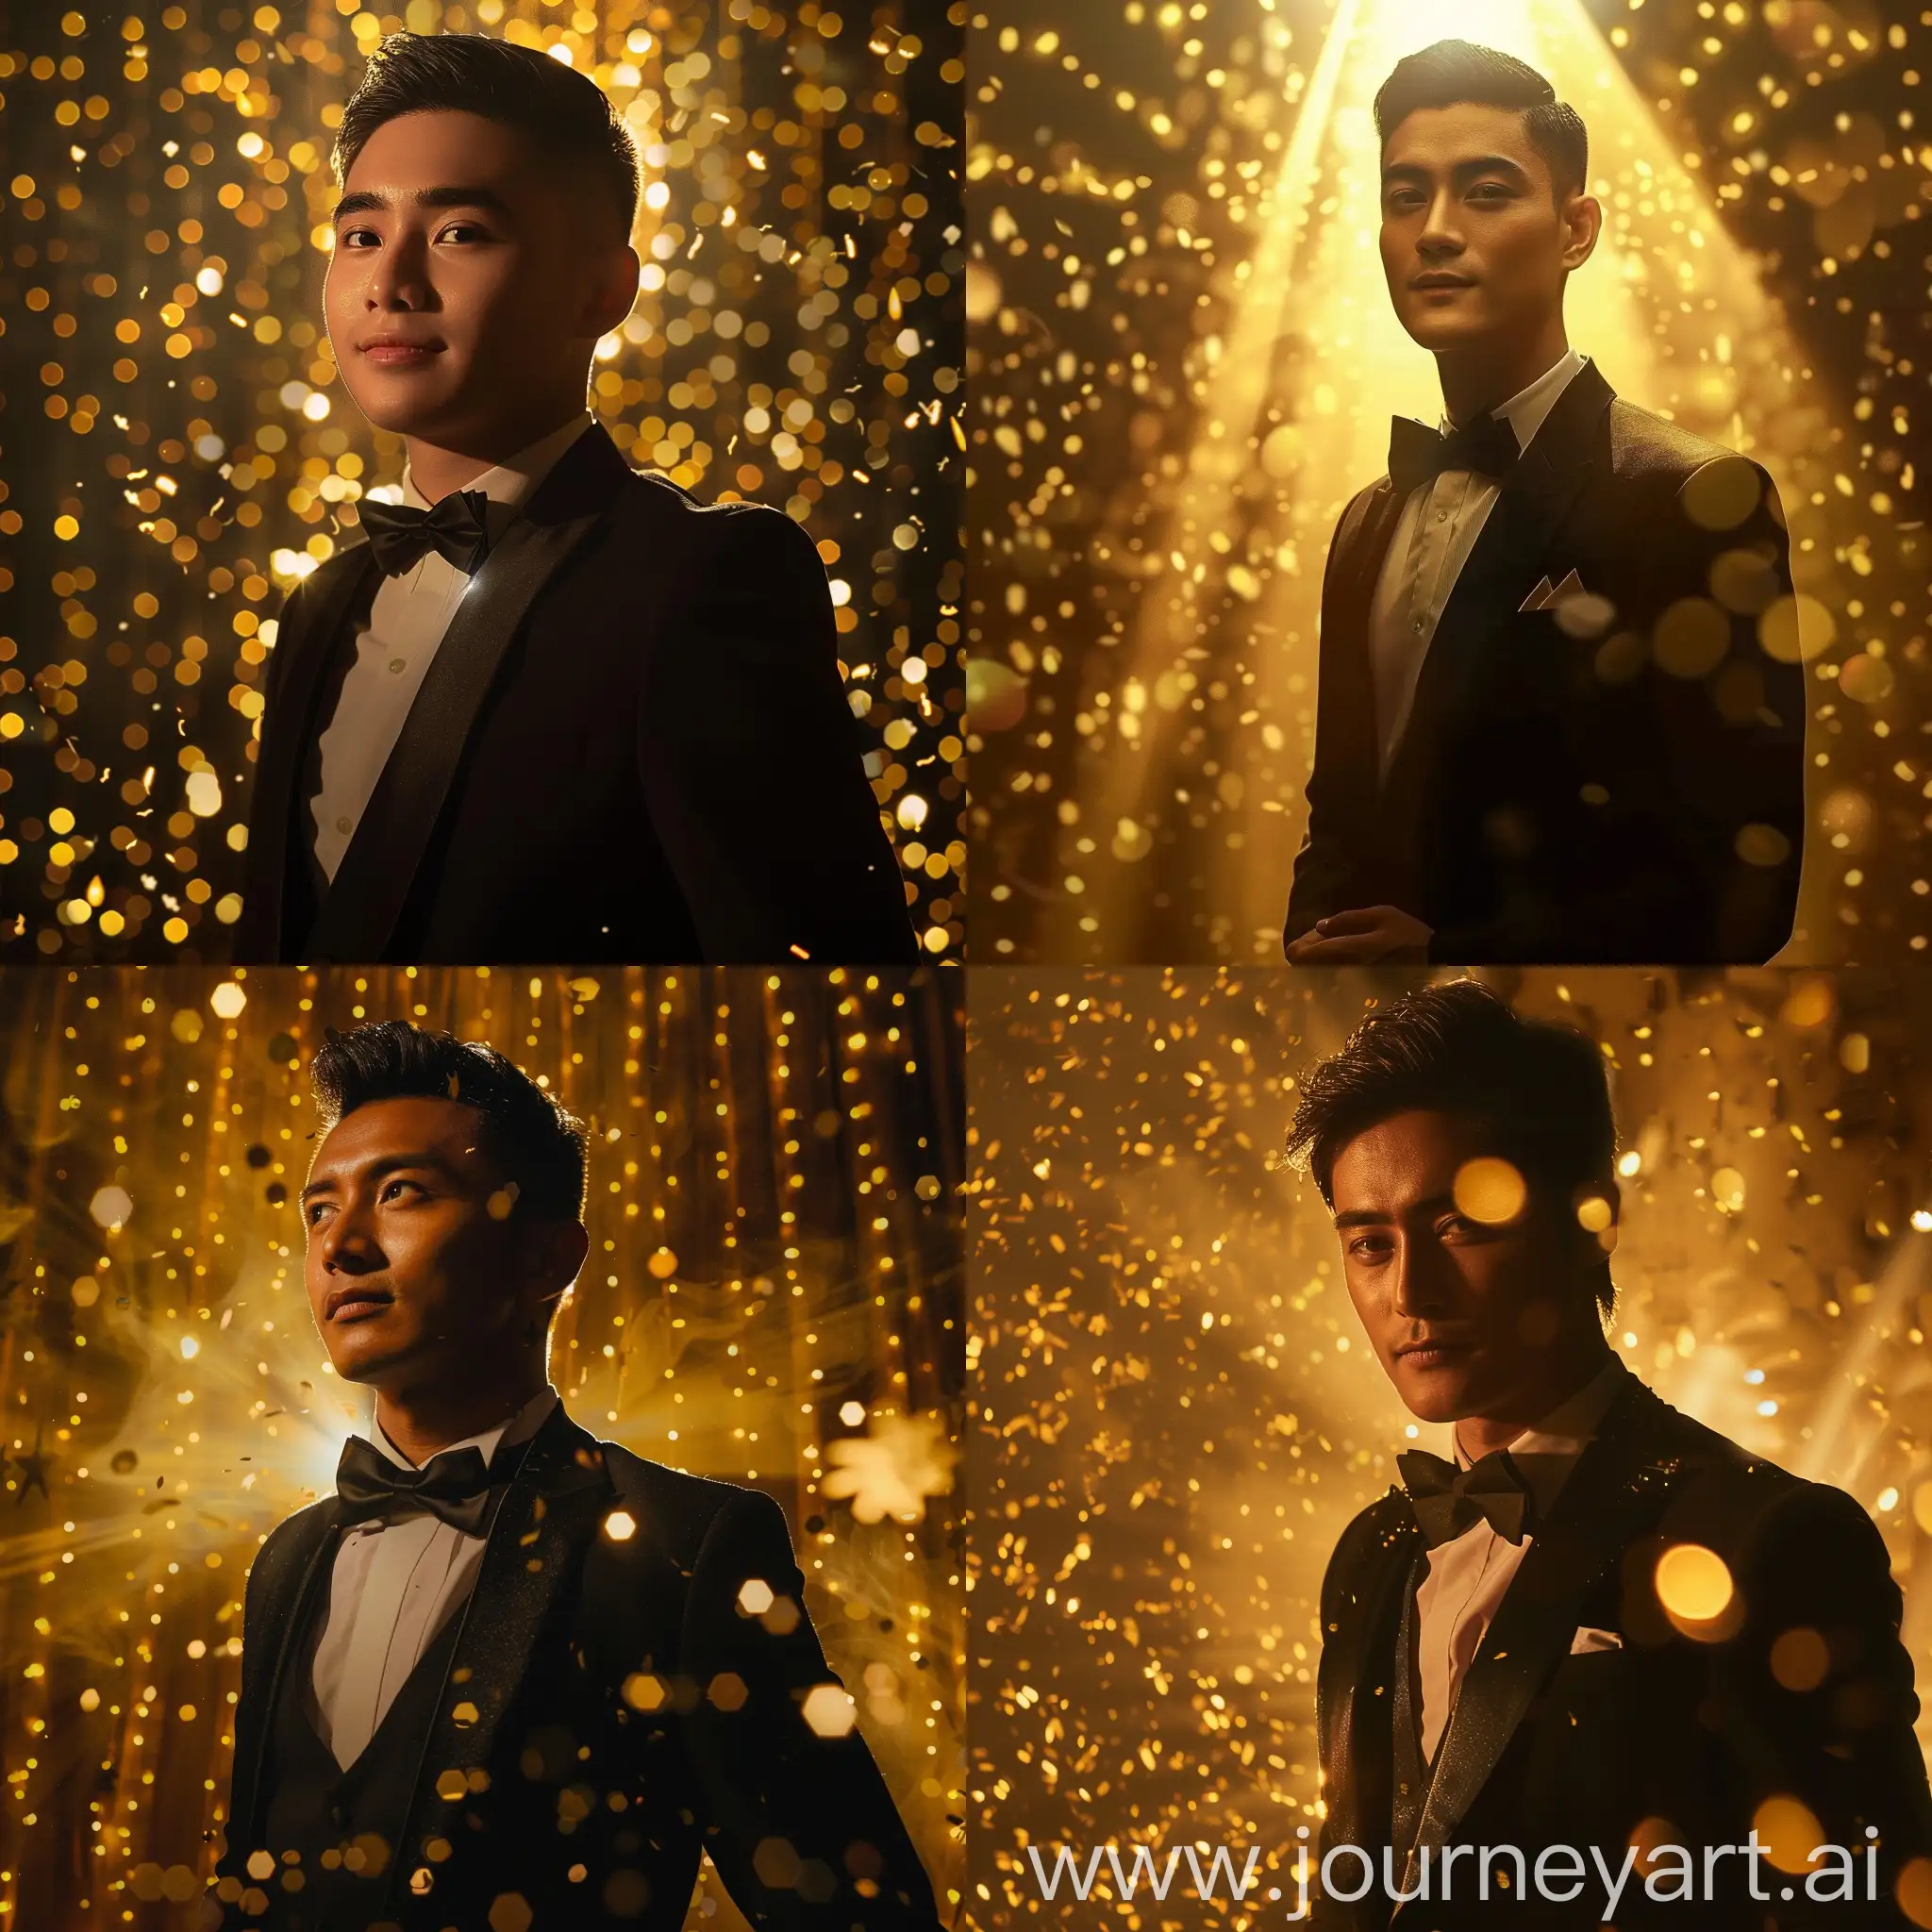 Cid Kageno from The Eminence In Shadow in a prom event using a Tuxedo with a Black-Tie, Golden background indoor and Golden Lights